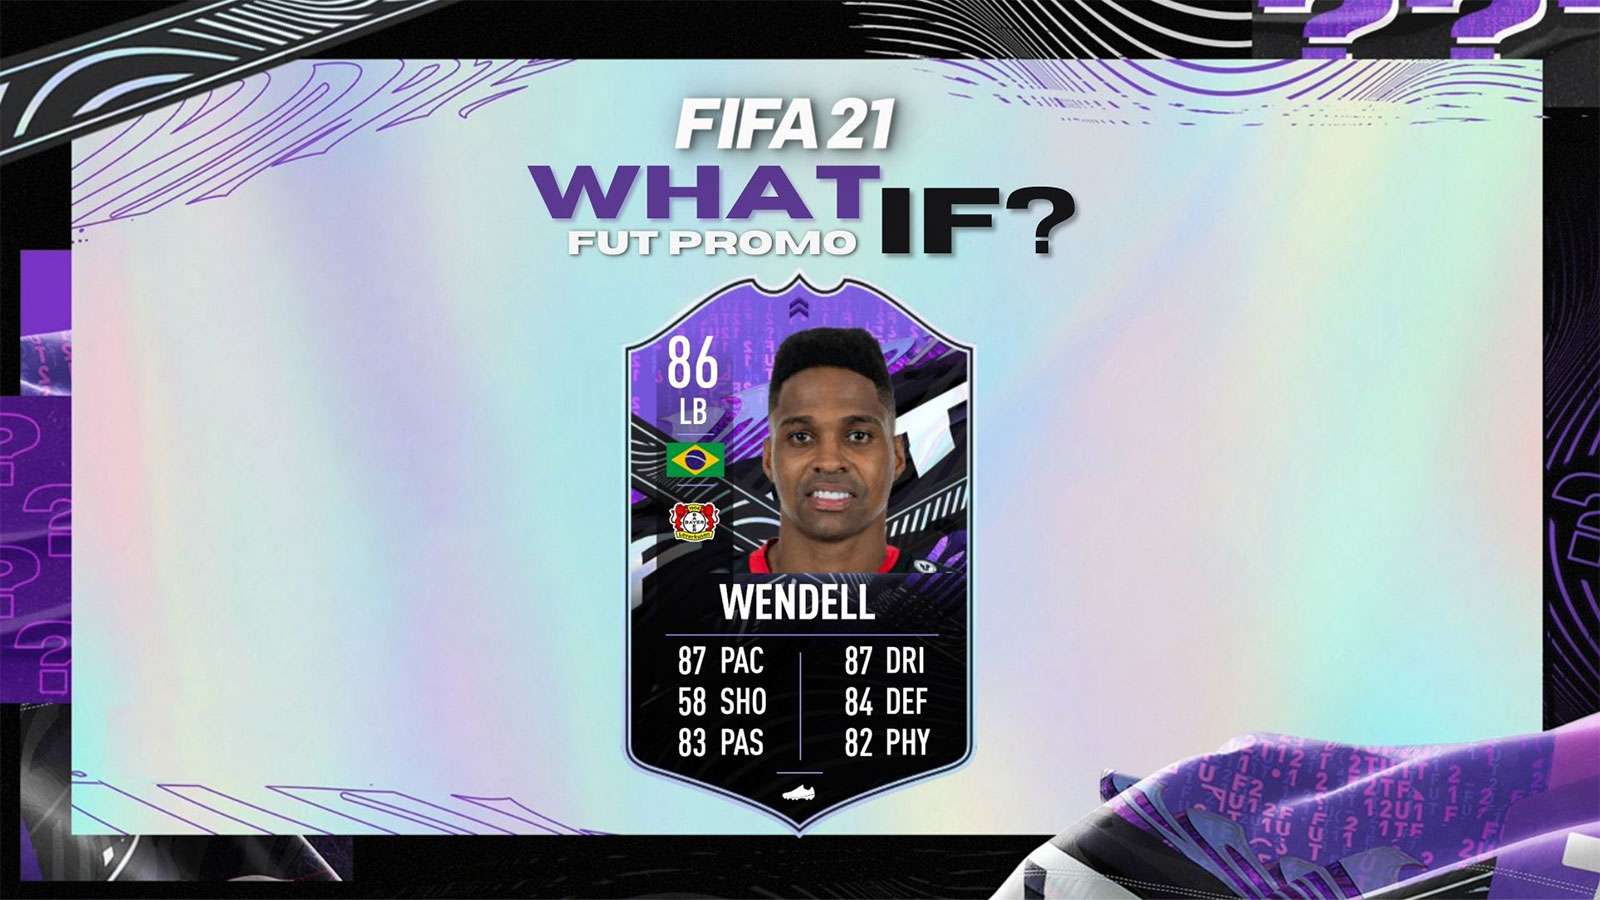 Wendell What If SBC FIFA 21